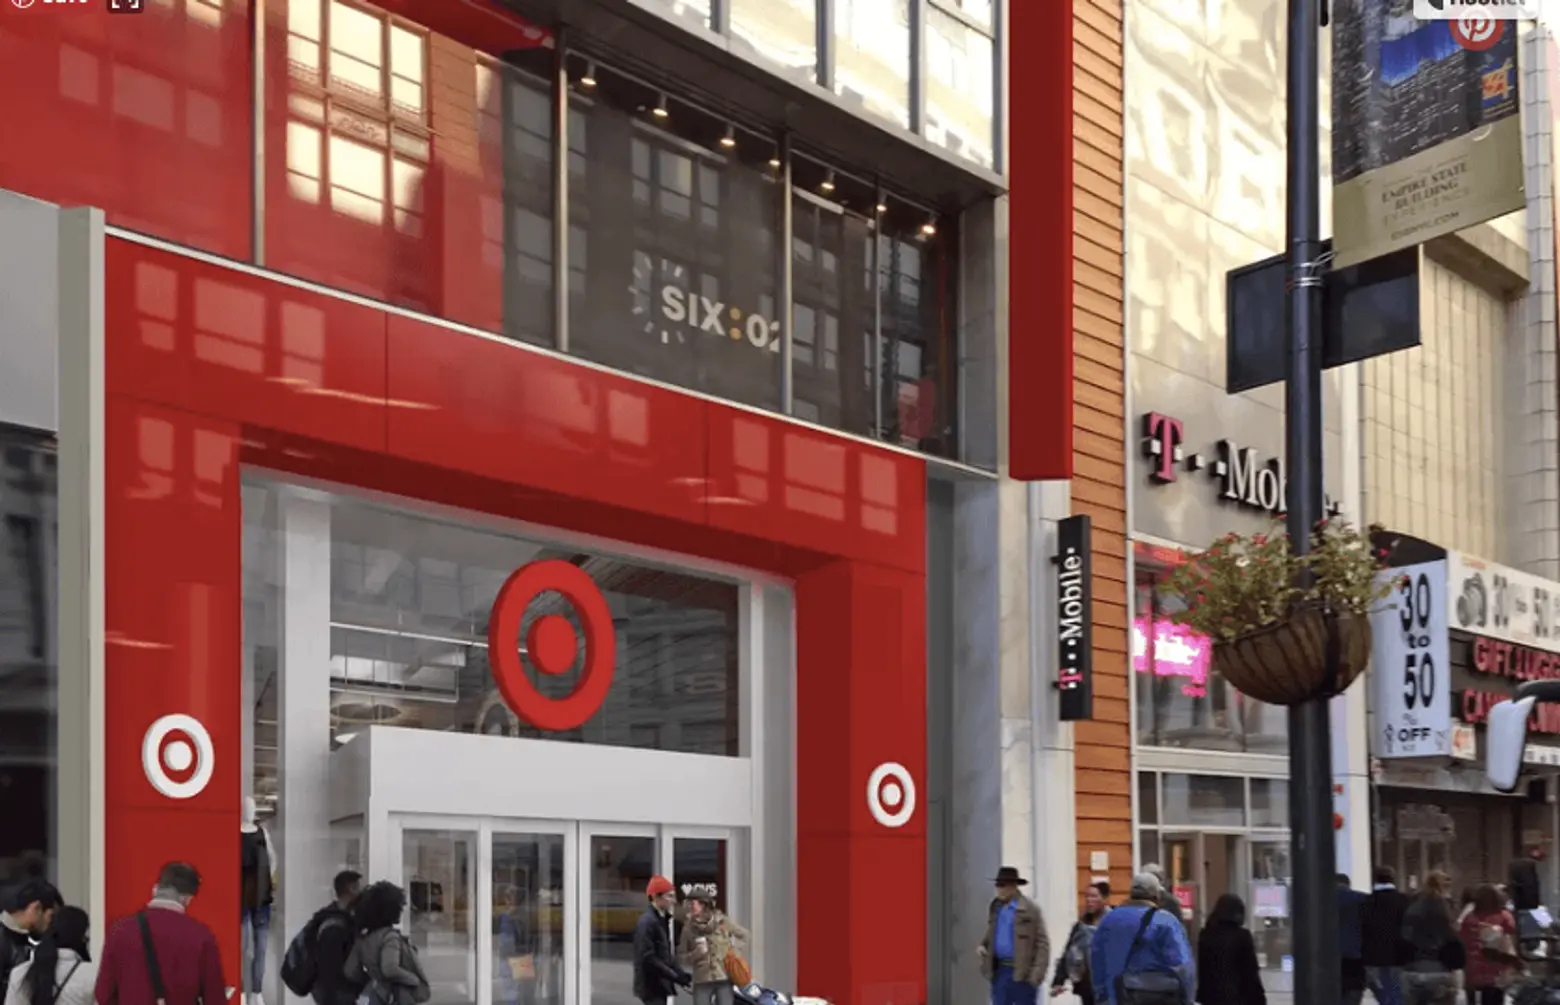 43,000-square-foot Target store headed for Herald Square